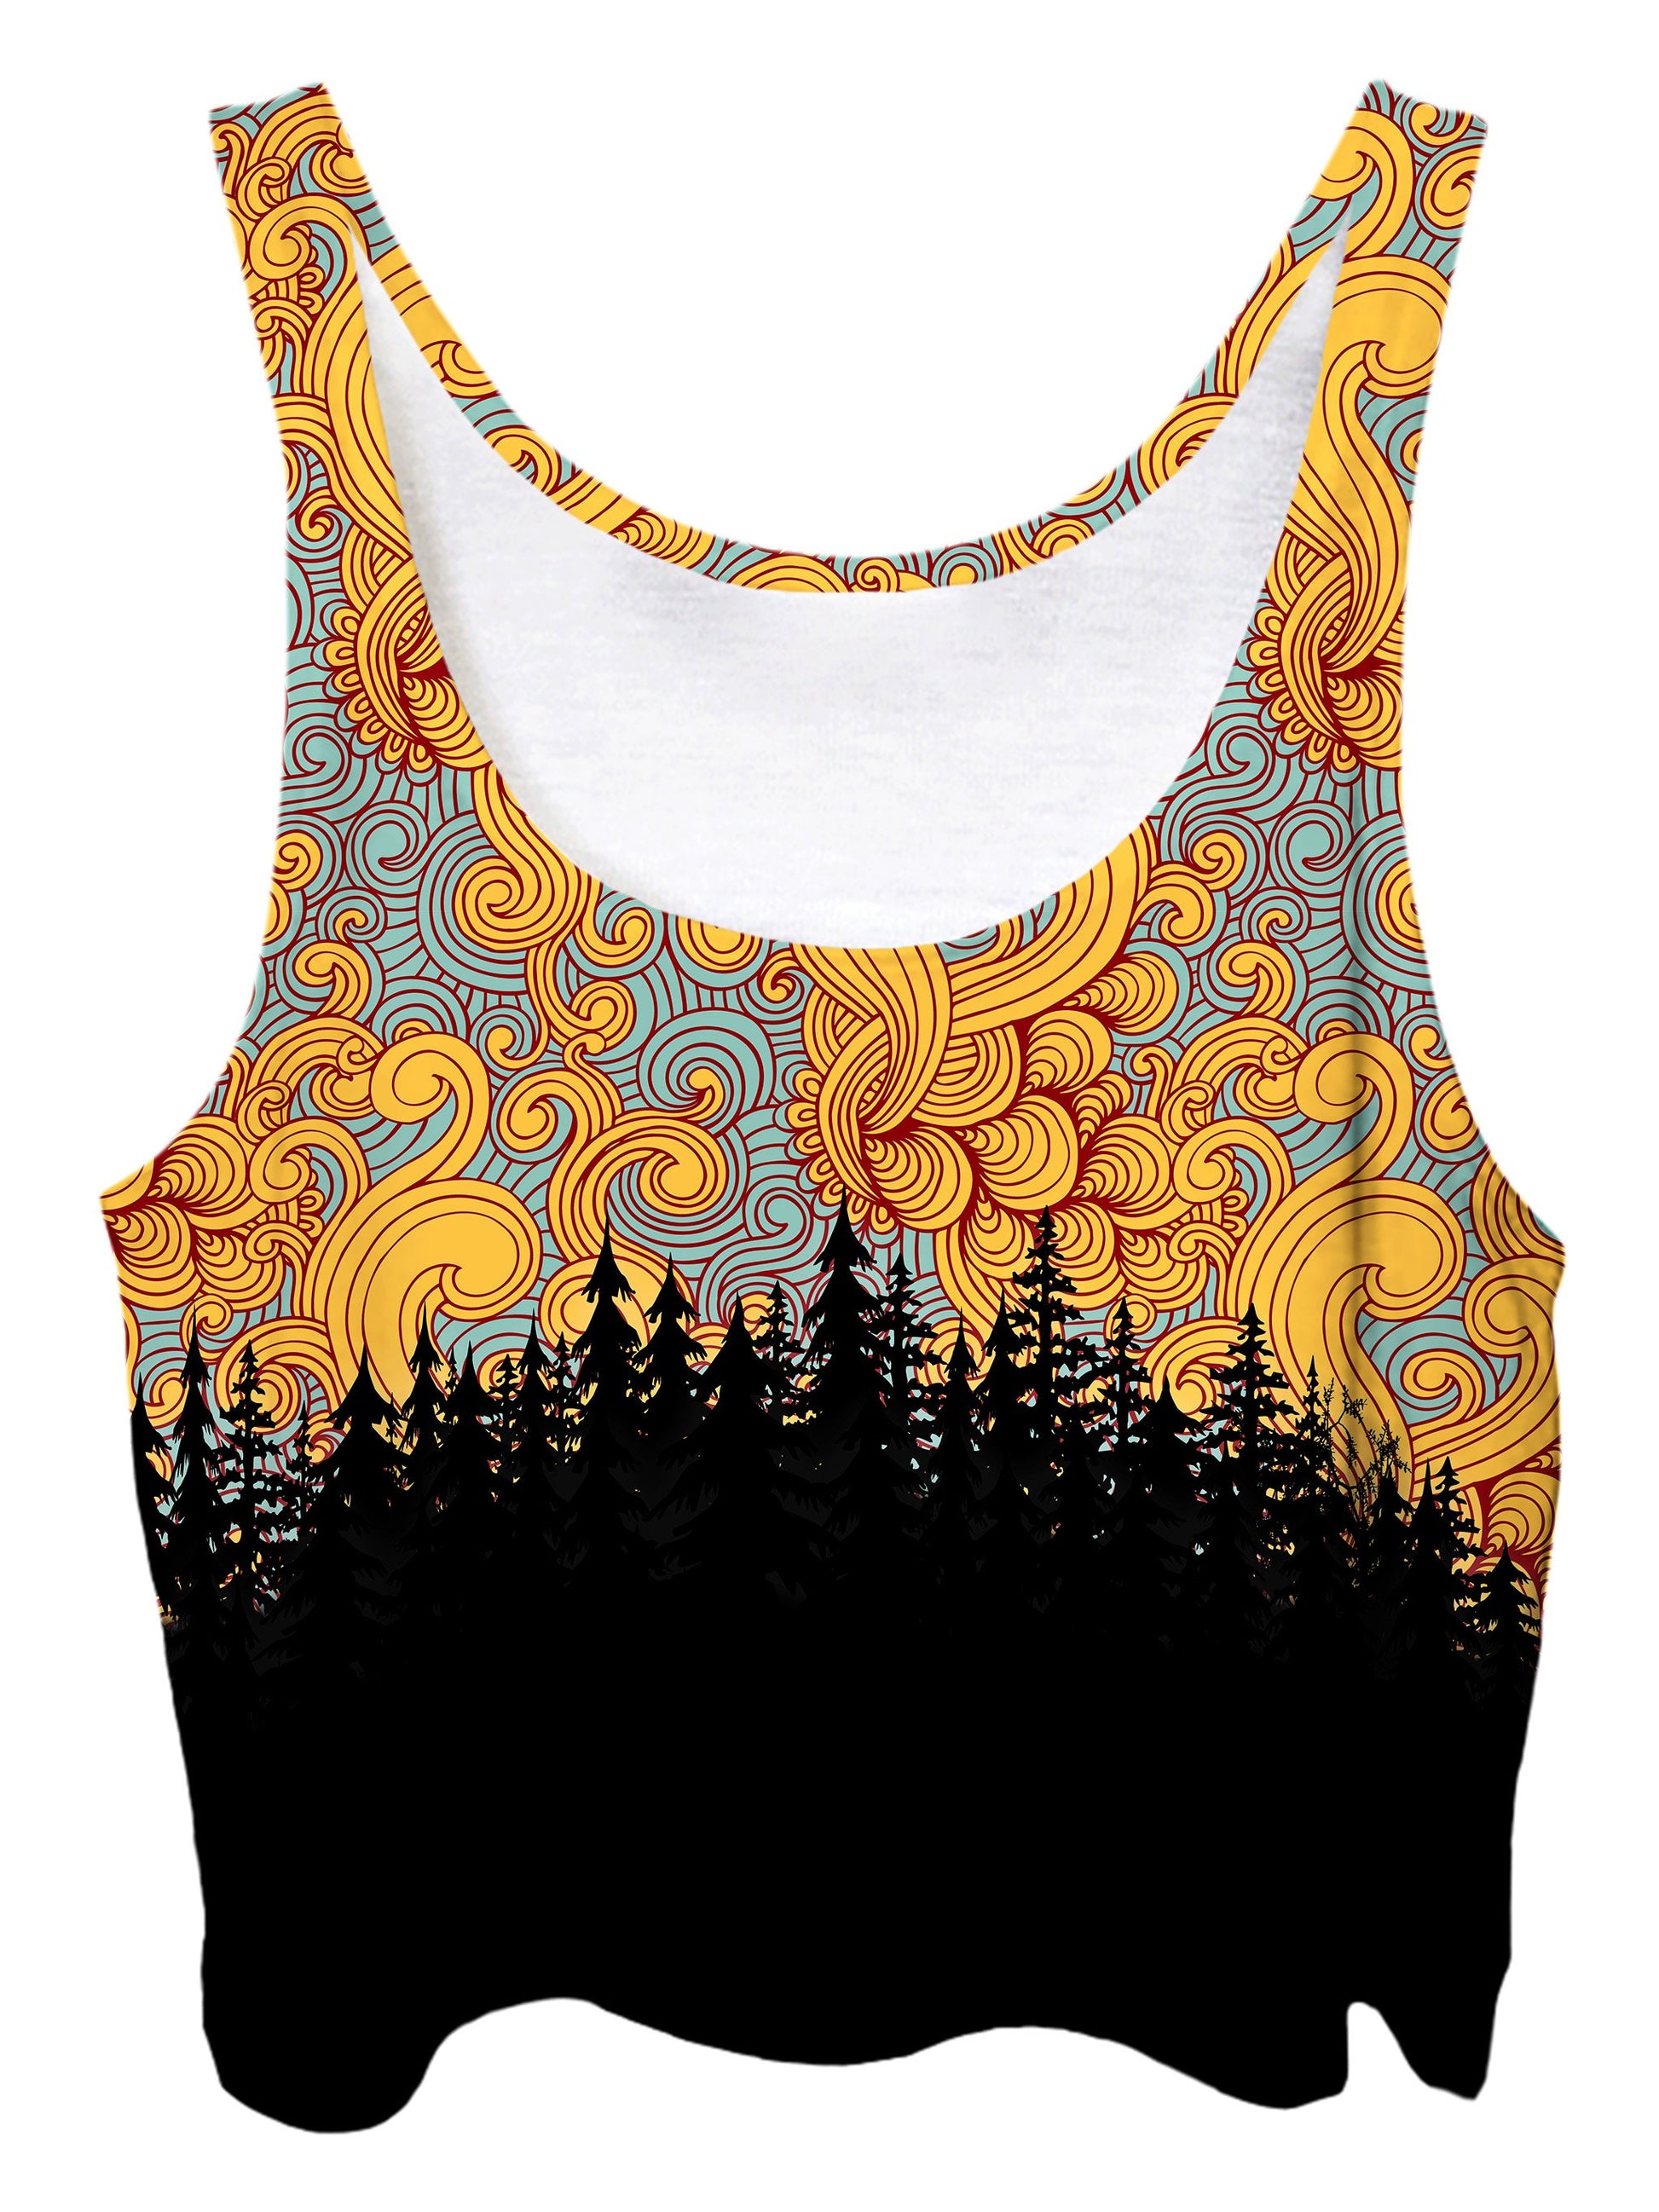 Trippy front view of GratefullyDyed Apparel orange, blue & black cloud swirl forest crop top.